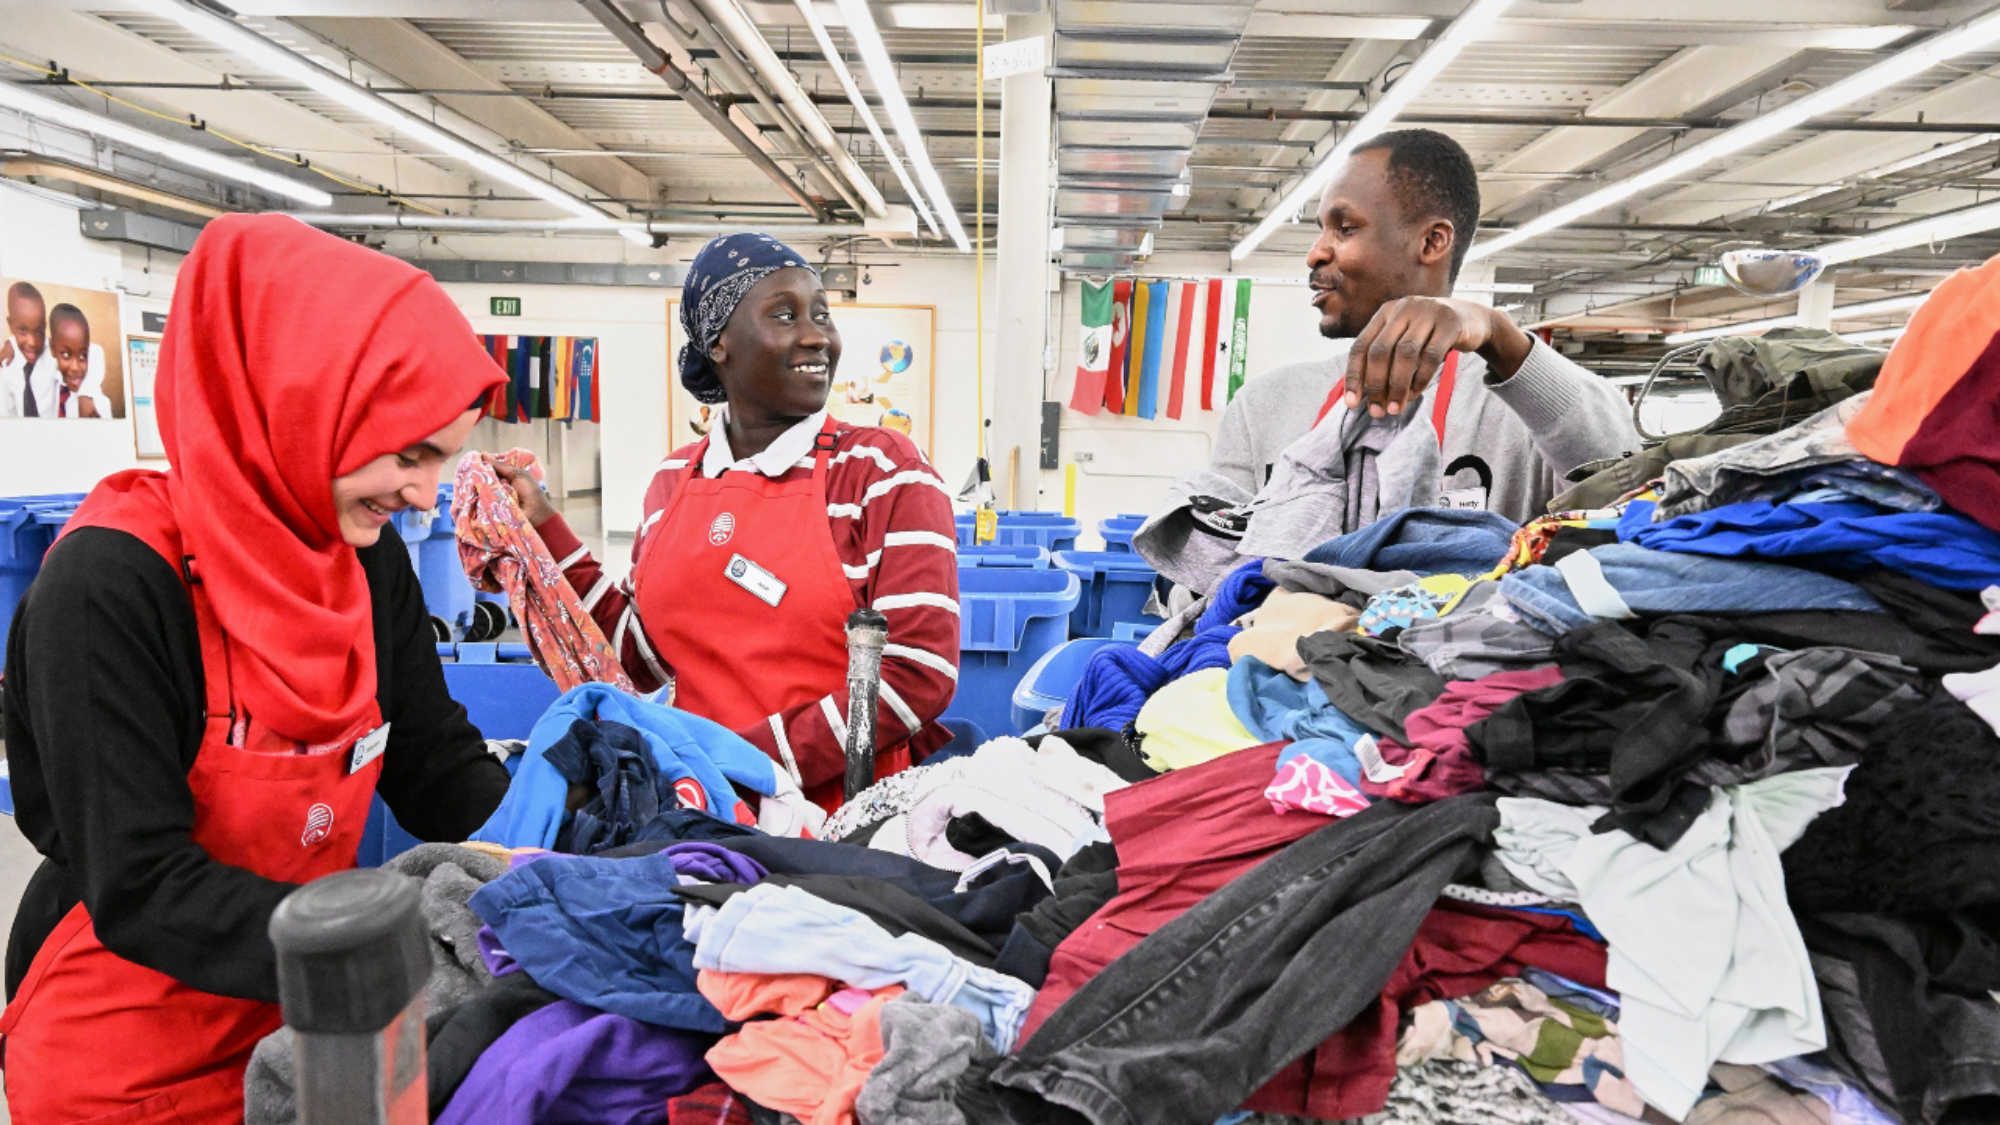 Three DI associates laugh as they talk and sort donated clothing at the LDS Humanitarian Center.